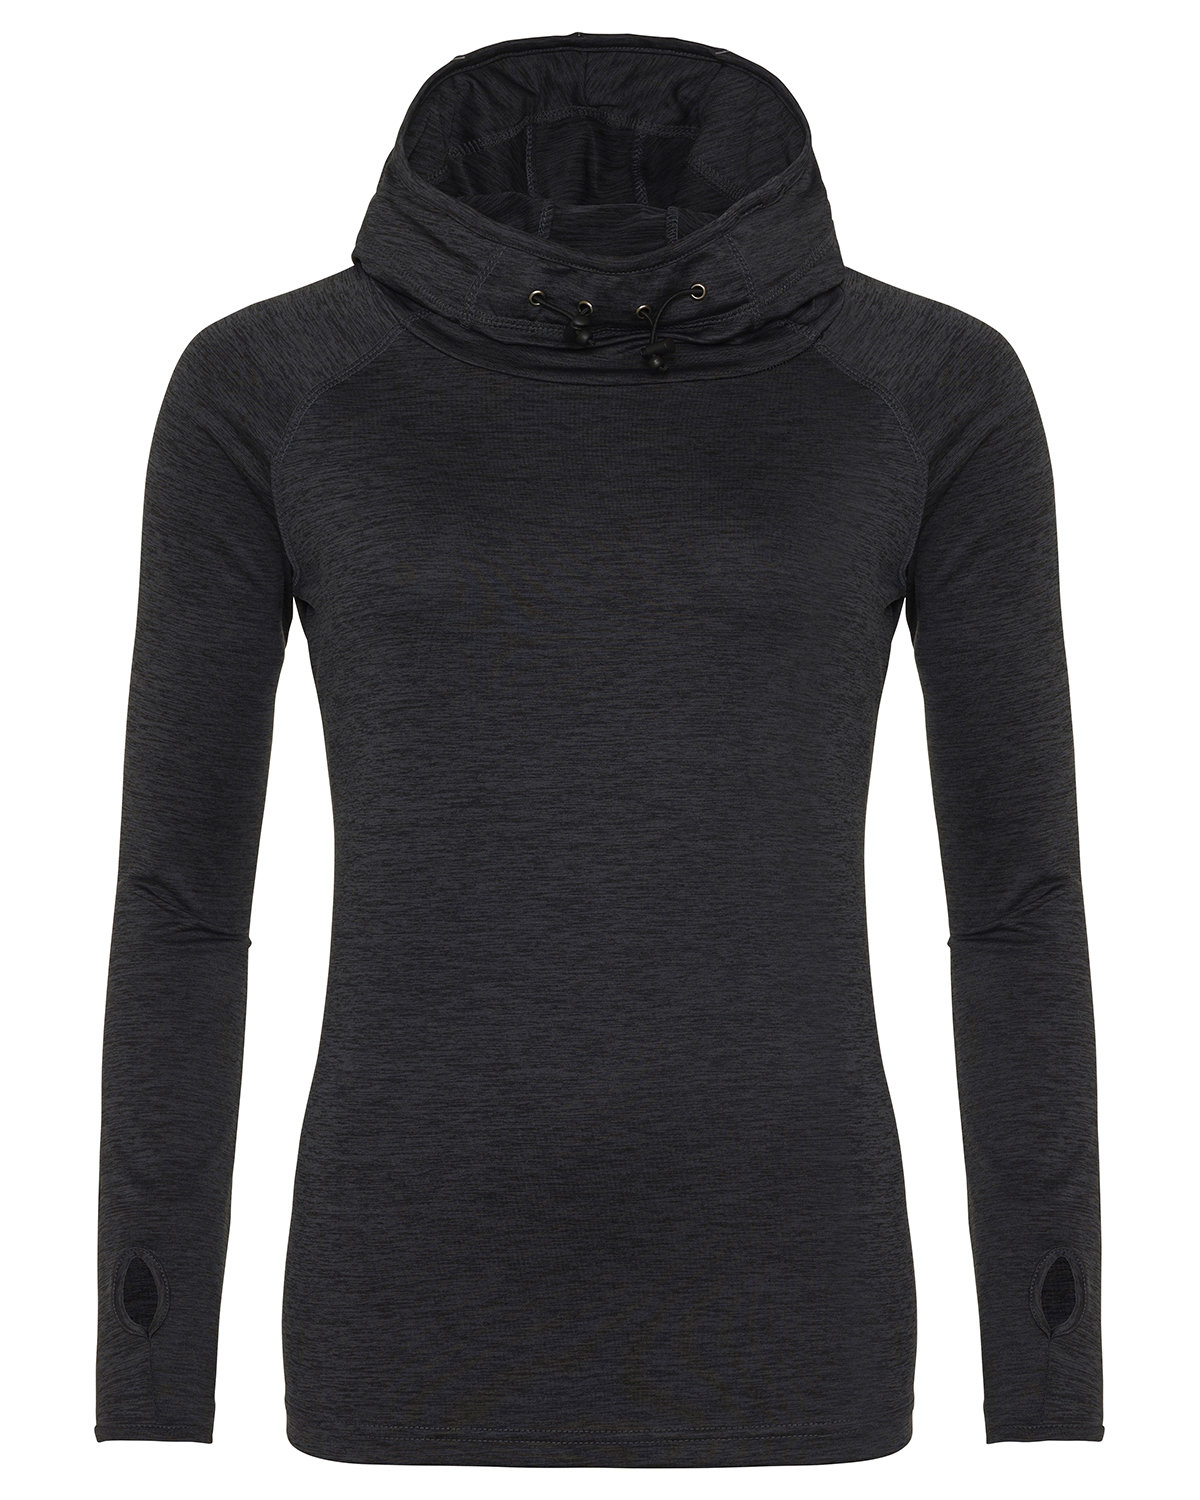 Ladies Cool Cowl-Neck Long-Sleeve T-Shirt-Just Hoods By AWDis